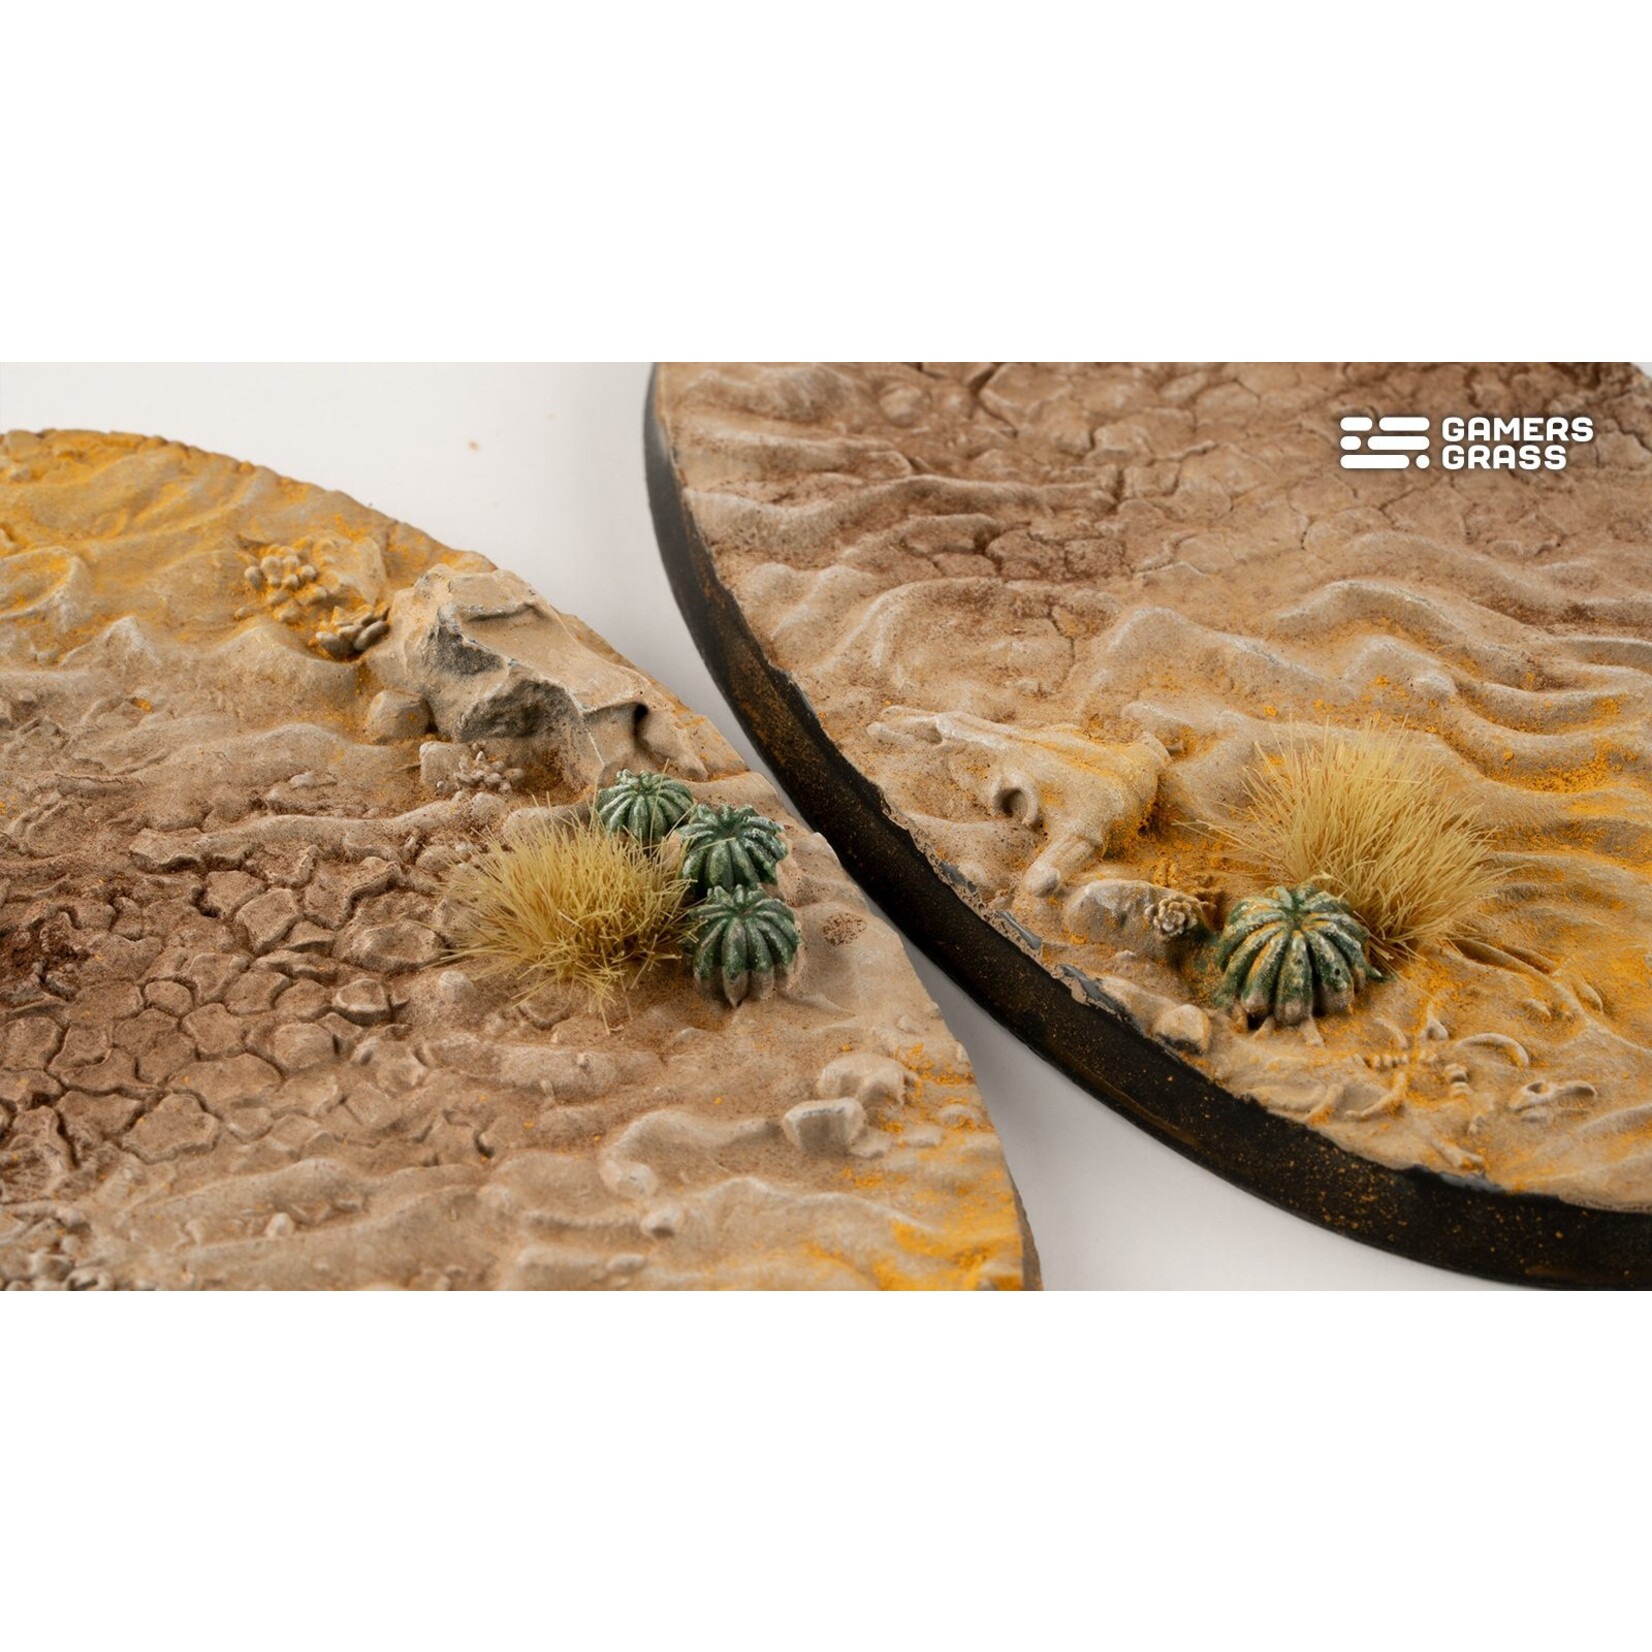 Gamers Grass Deserts of Maahl Bases Pre-Painted (2x 90mm Oval)